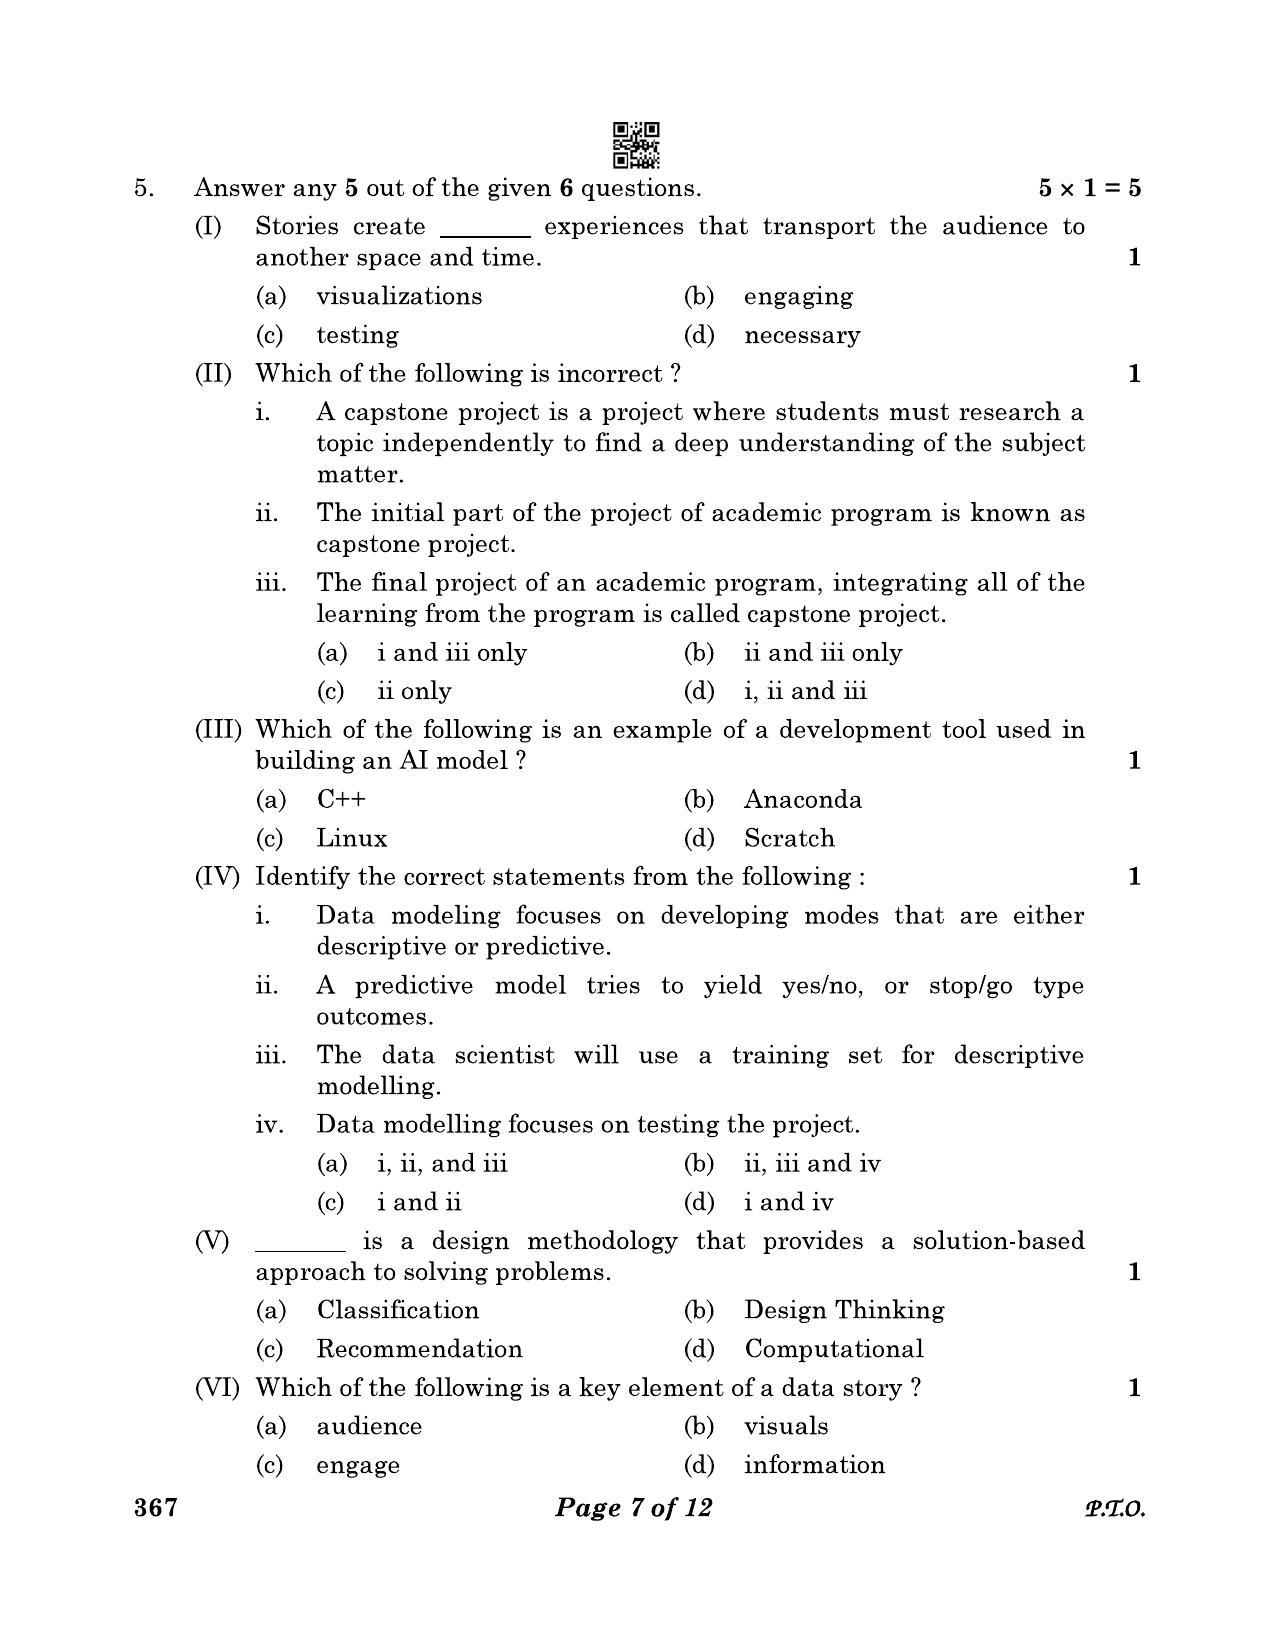 CBSE Class 12 367_Artificial Intelligence 2023 Question Paper - Page 7